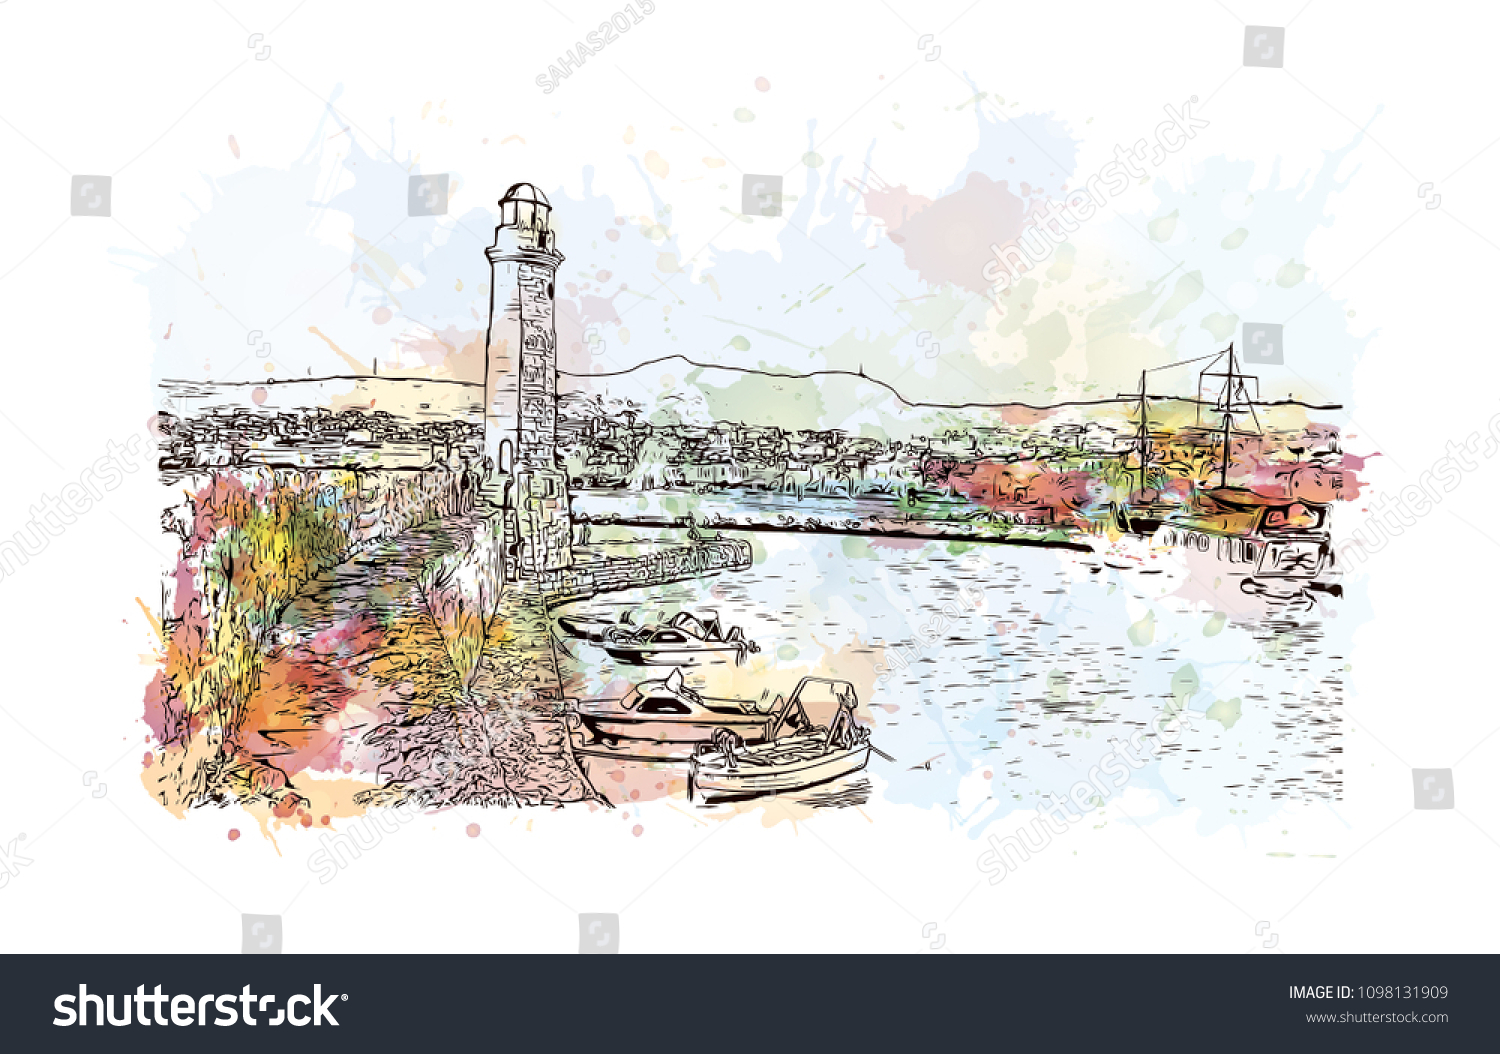 SVG of Landmark building view with street of Crete, Greece's largest island, Greece. Watercolor splash with Hand drawn sketch illustration in vector. svg